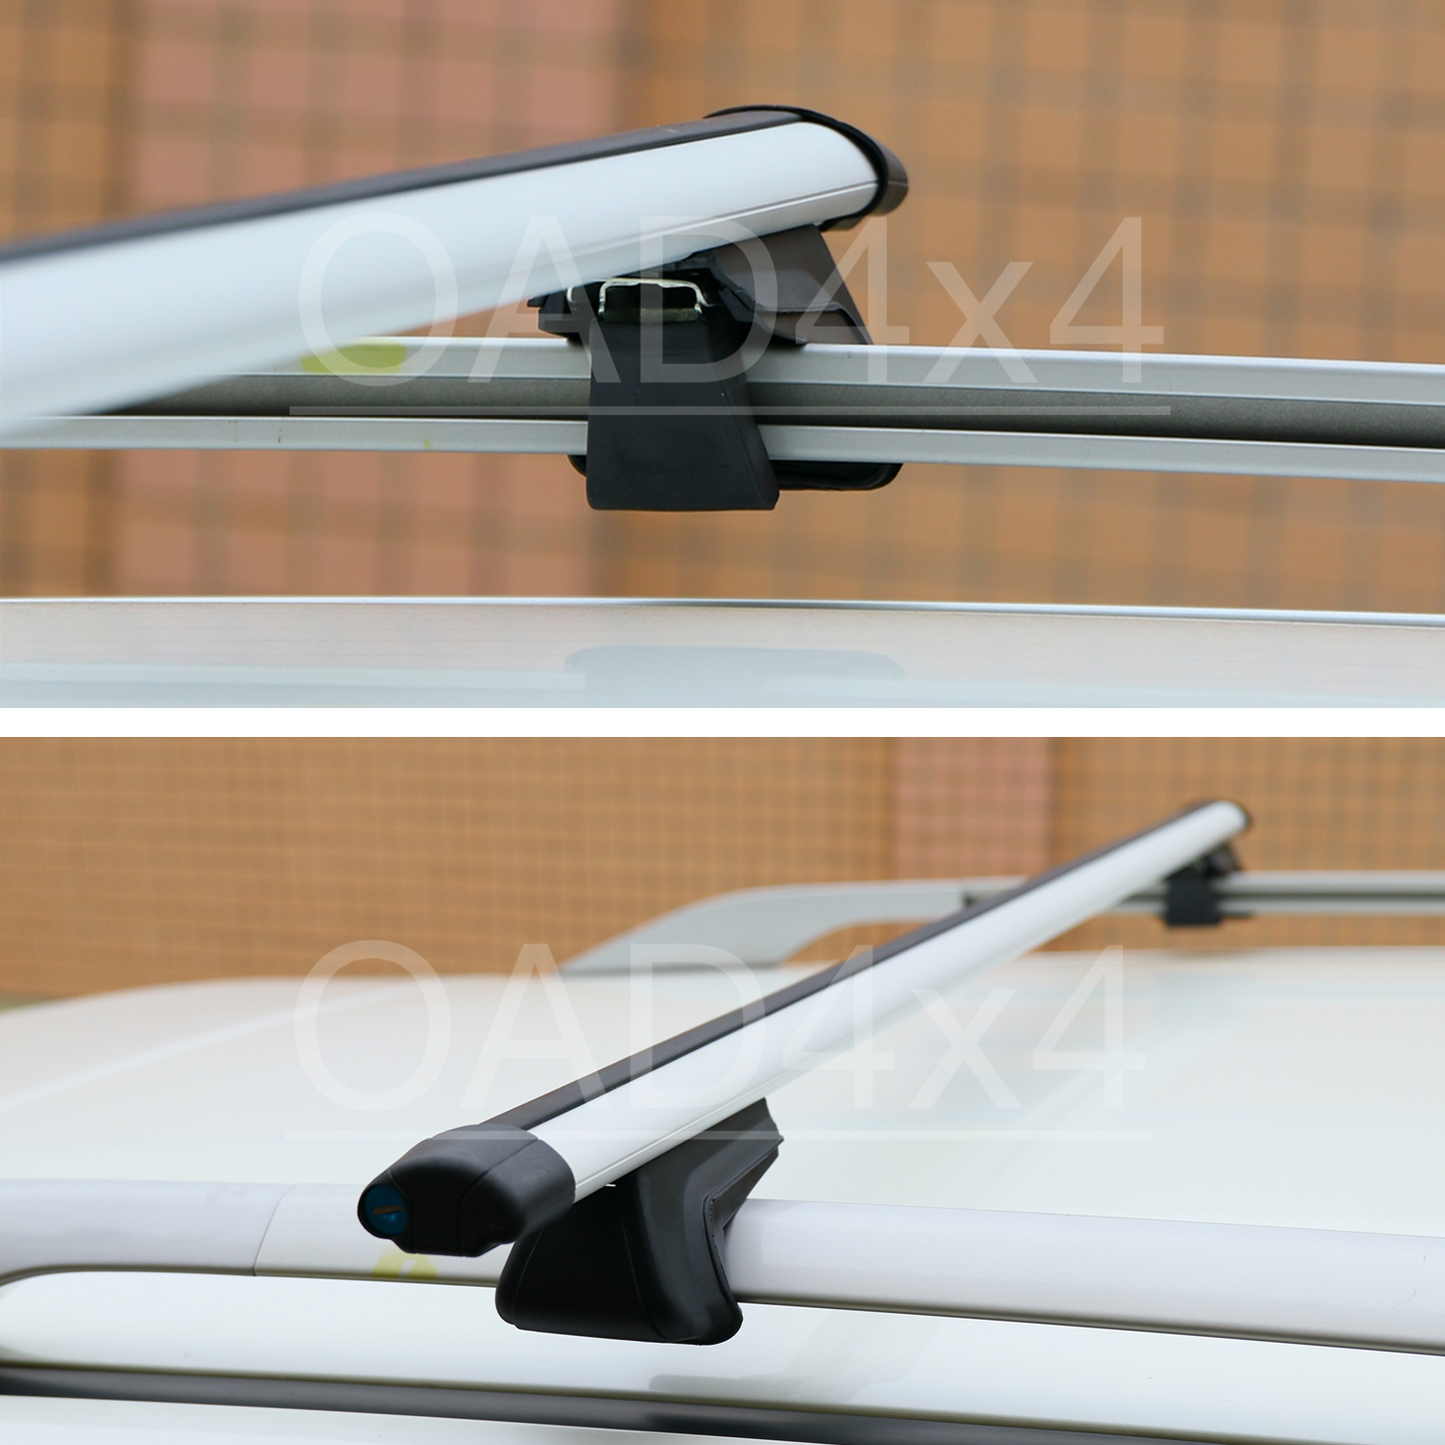 OAD 1 pair Aluminum Silver Cross Bar Roof Racks Baggage holder for Nissan Pathfinder R52 14-21 with raised roof rail